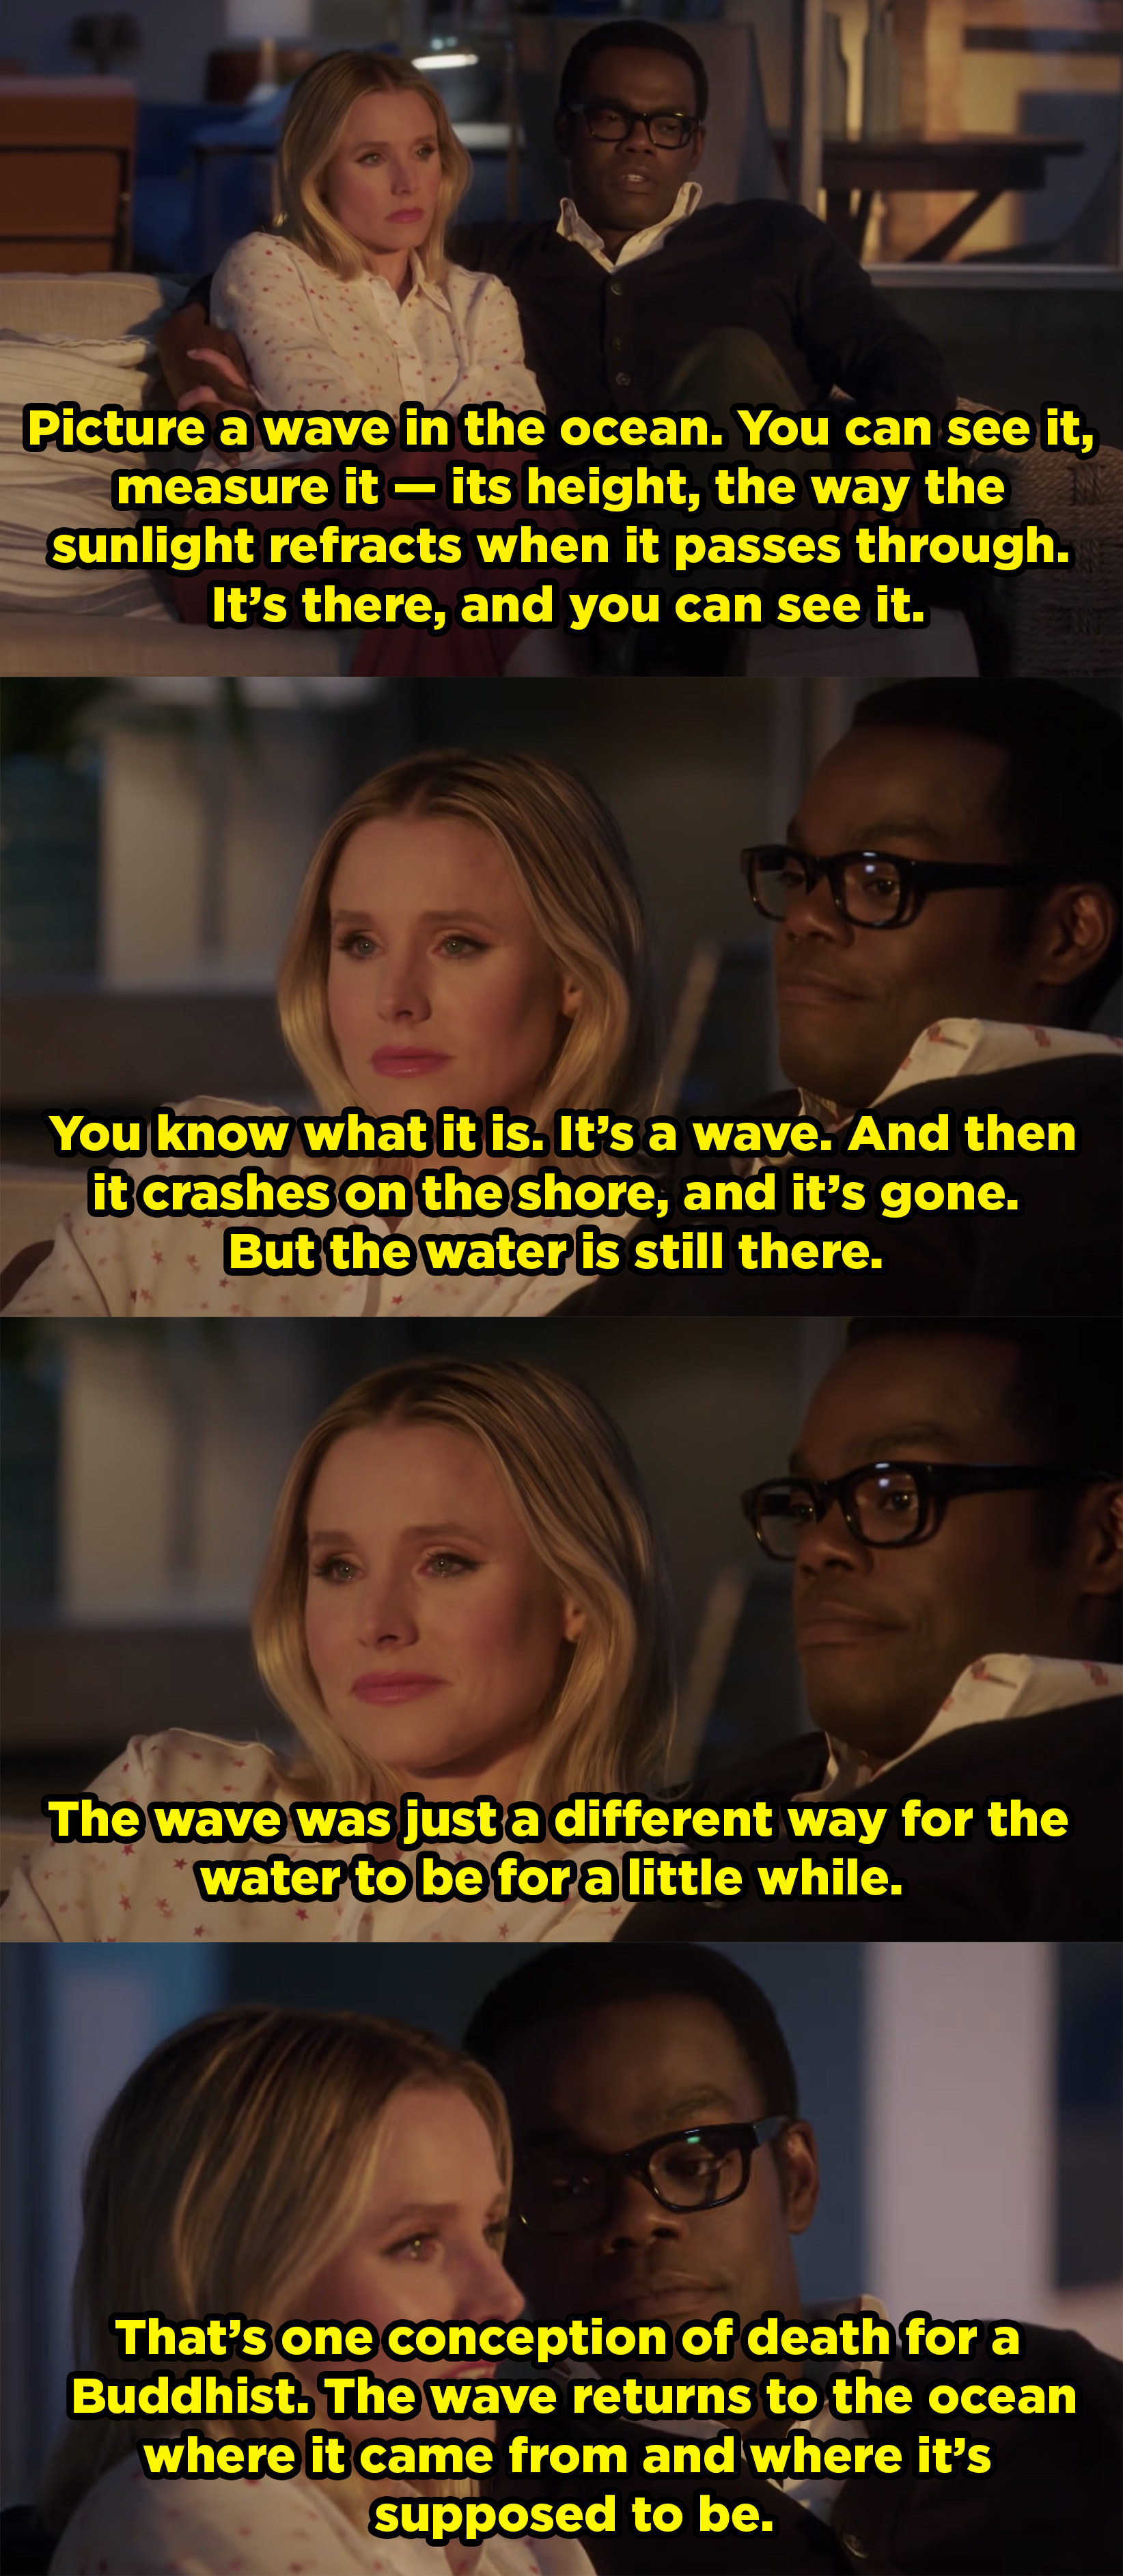 Chidi tells Eleanor about how a wave is only a wave for a little while, but its always water and once the wave crashes it goes back to the ocean, where it&#x27;s supposed to be. He relates that to the Buddhist conception of death.